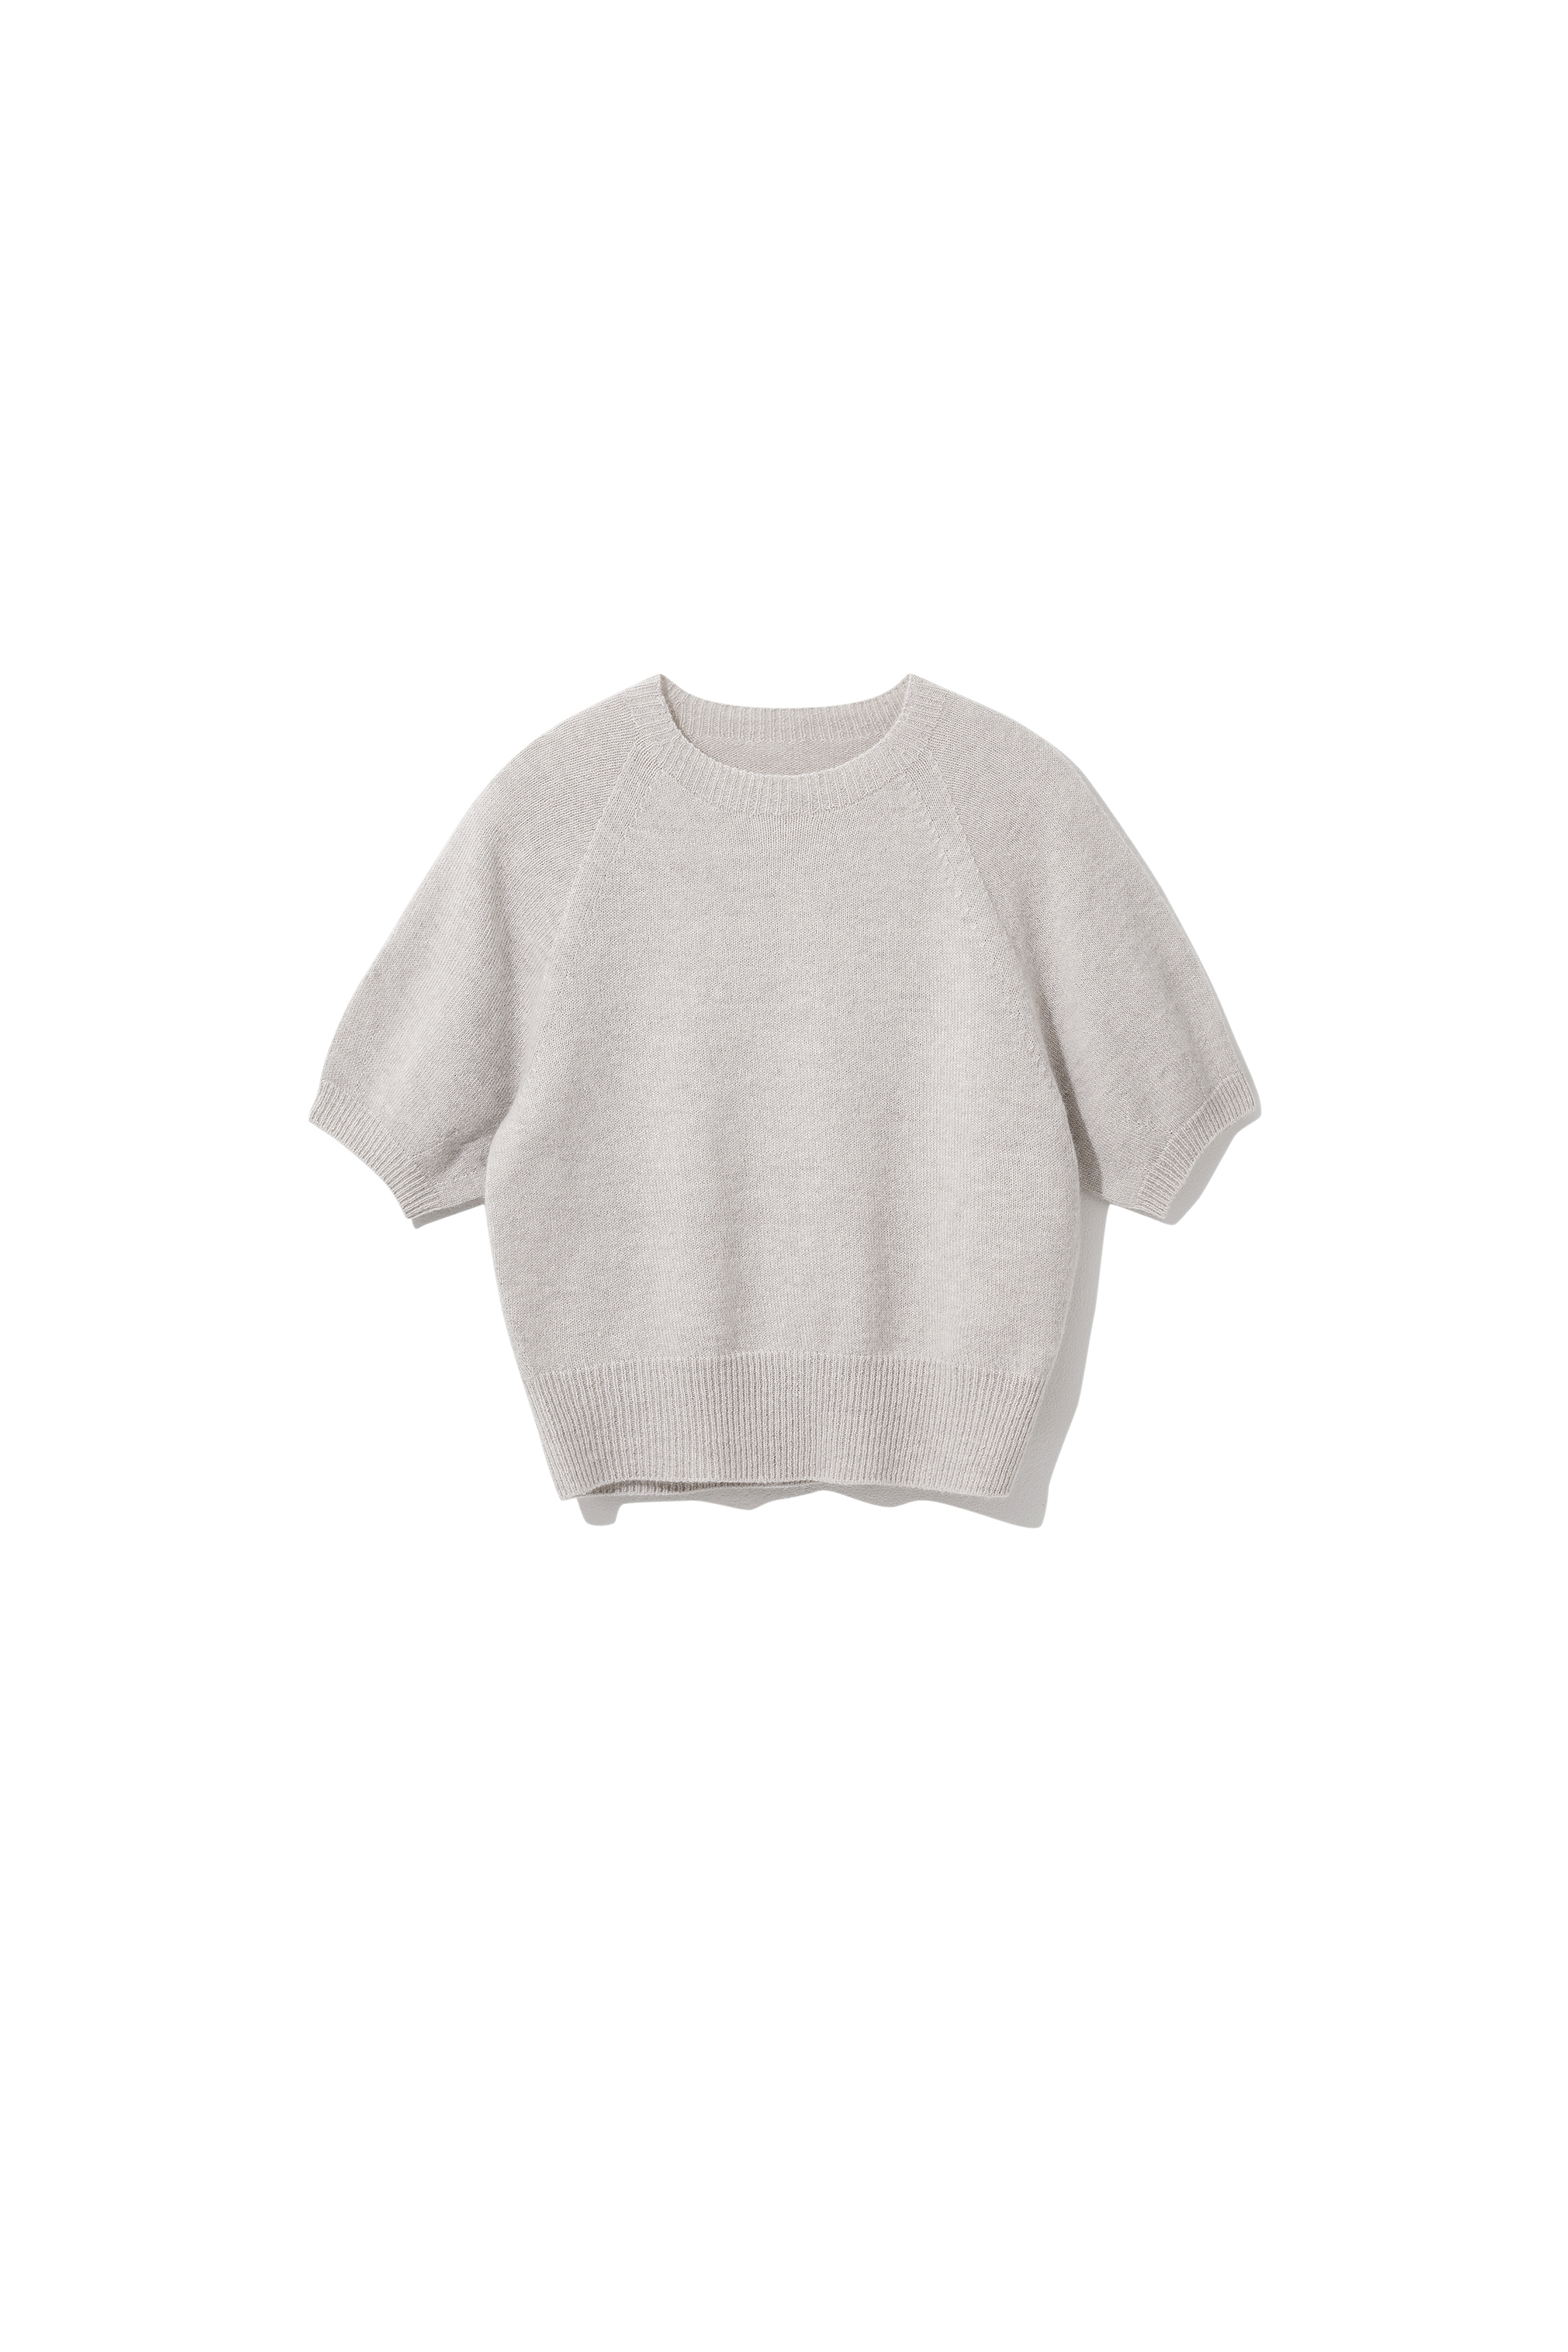 Mong Puff Sleeve Knitted P/O Greige [25% OFF, 09.18(MON) - 09.22(FRI)]